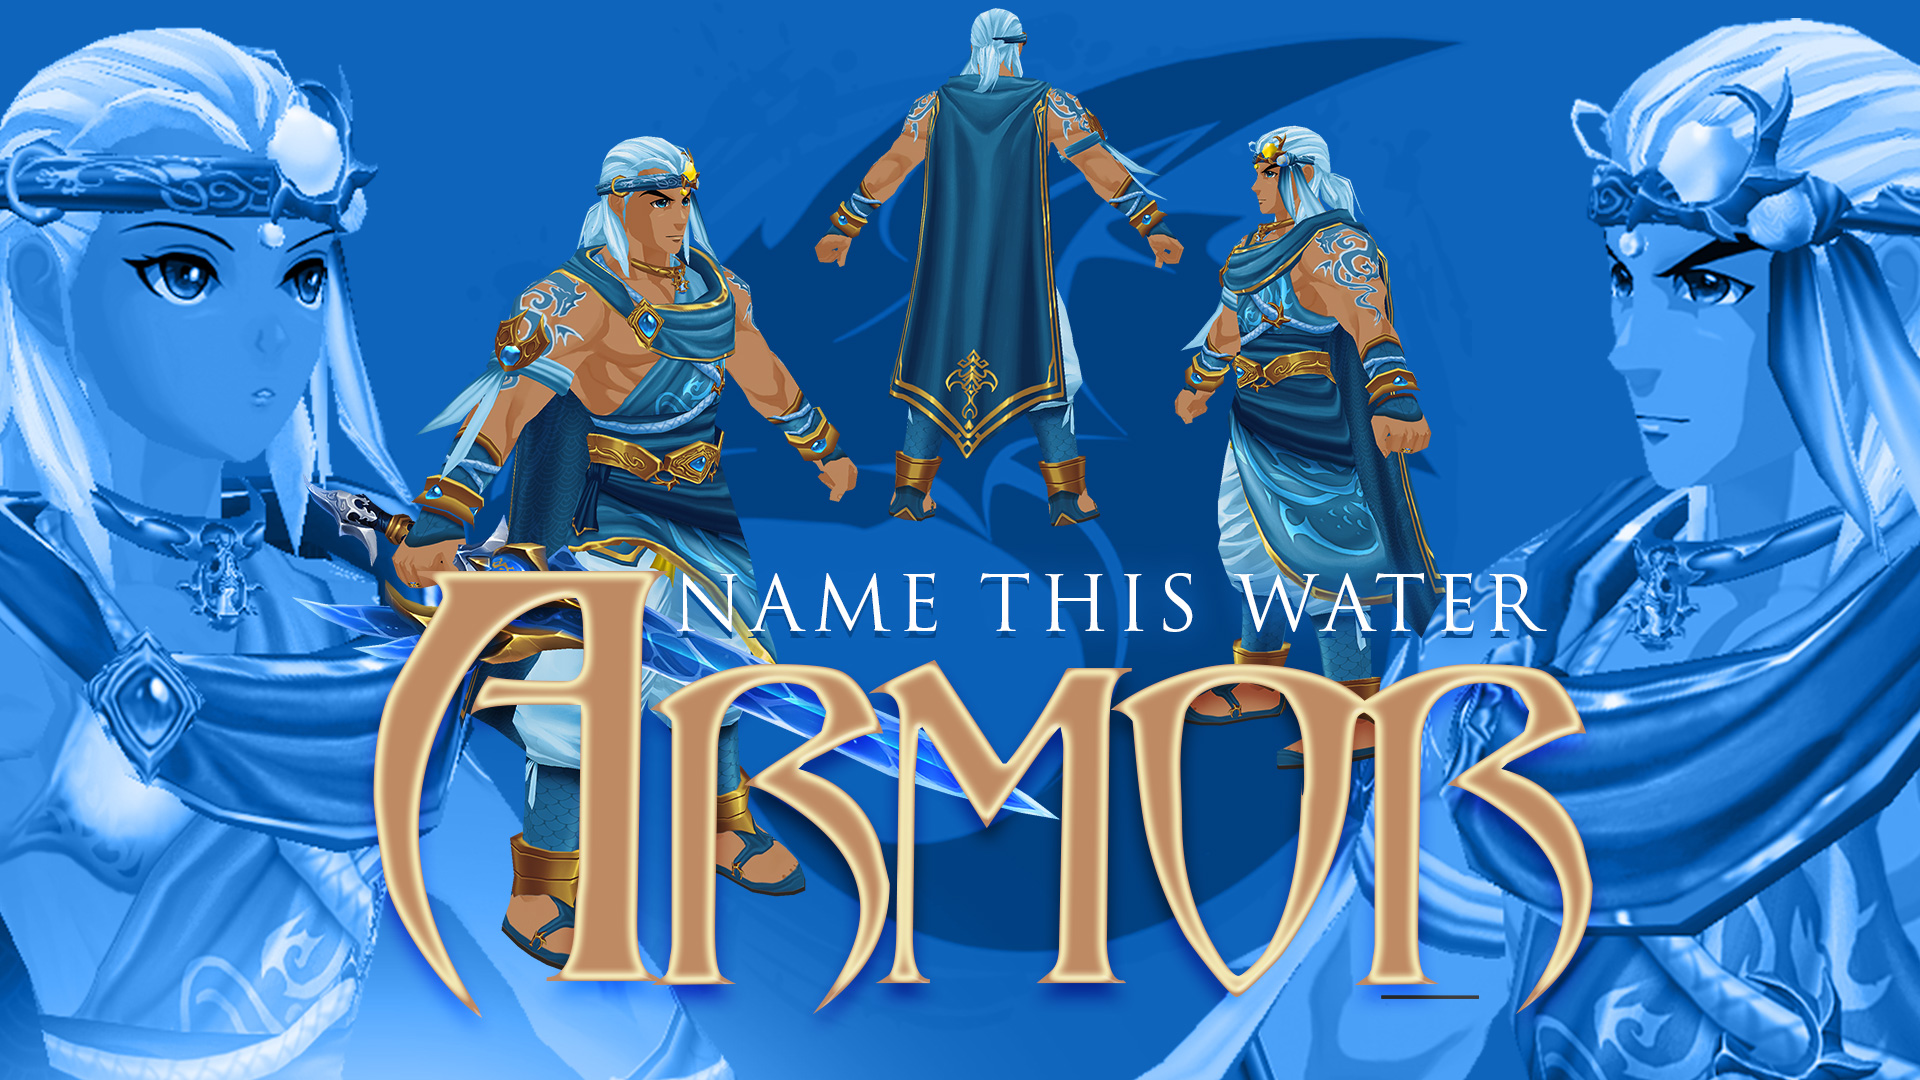 water armor